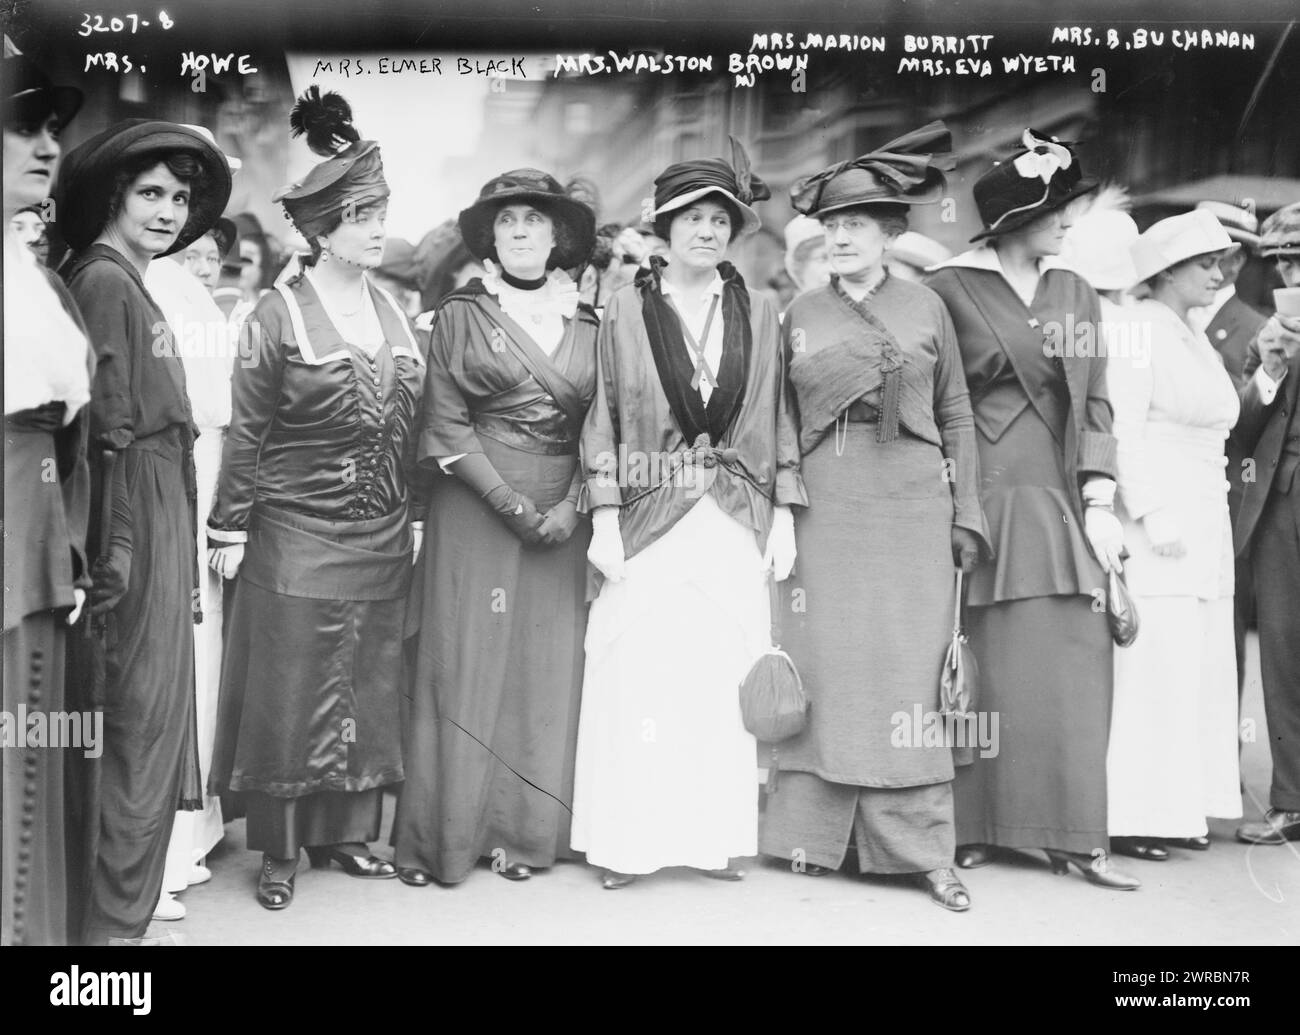 Mrs. Howe, Mrs. Elmer Black, Mrs. Walston Brown, Mrs. Marion Burritt Mrs. B. Buchannan, Mrs. Eva Wyeth, Photograph shows Margaret Vale Howe, Madeleine Powell Balck, chair of the American Peace and Arbitration League, Eve Rovert Ingersoll Brown and Miss Marion T. Burritt. Women were participants in a women's peace parade down Fifth Avenue in New York City on August 29, 1914, shortly after the start of World War I., 1914 Aug. 29, Glass negatives, 1 negative: glass Stock Photo